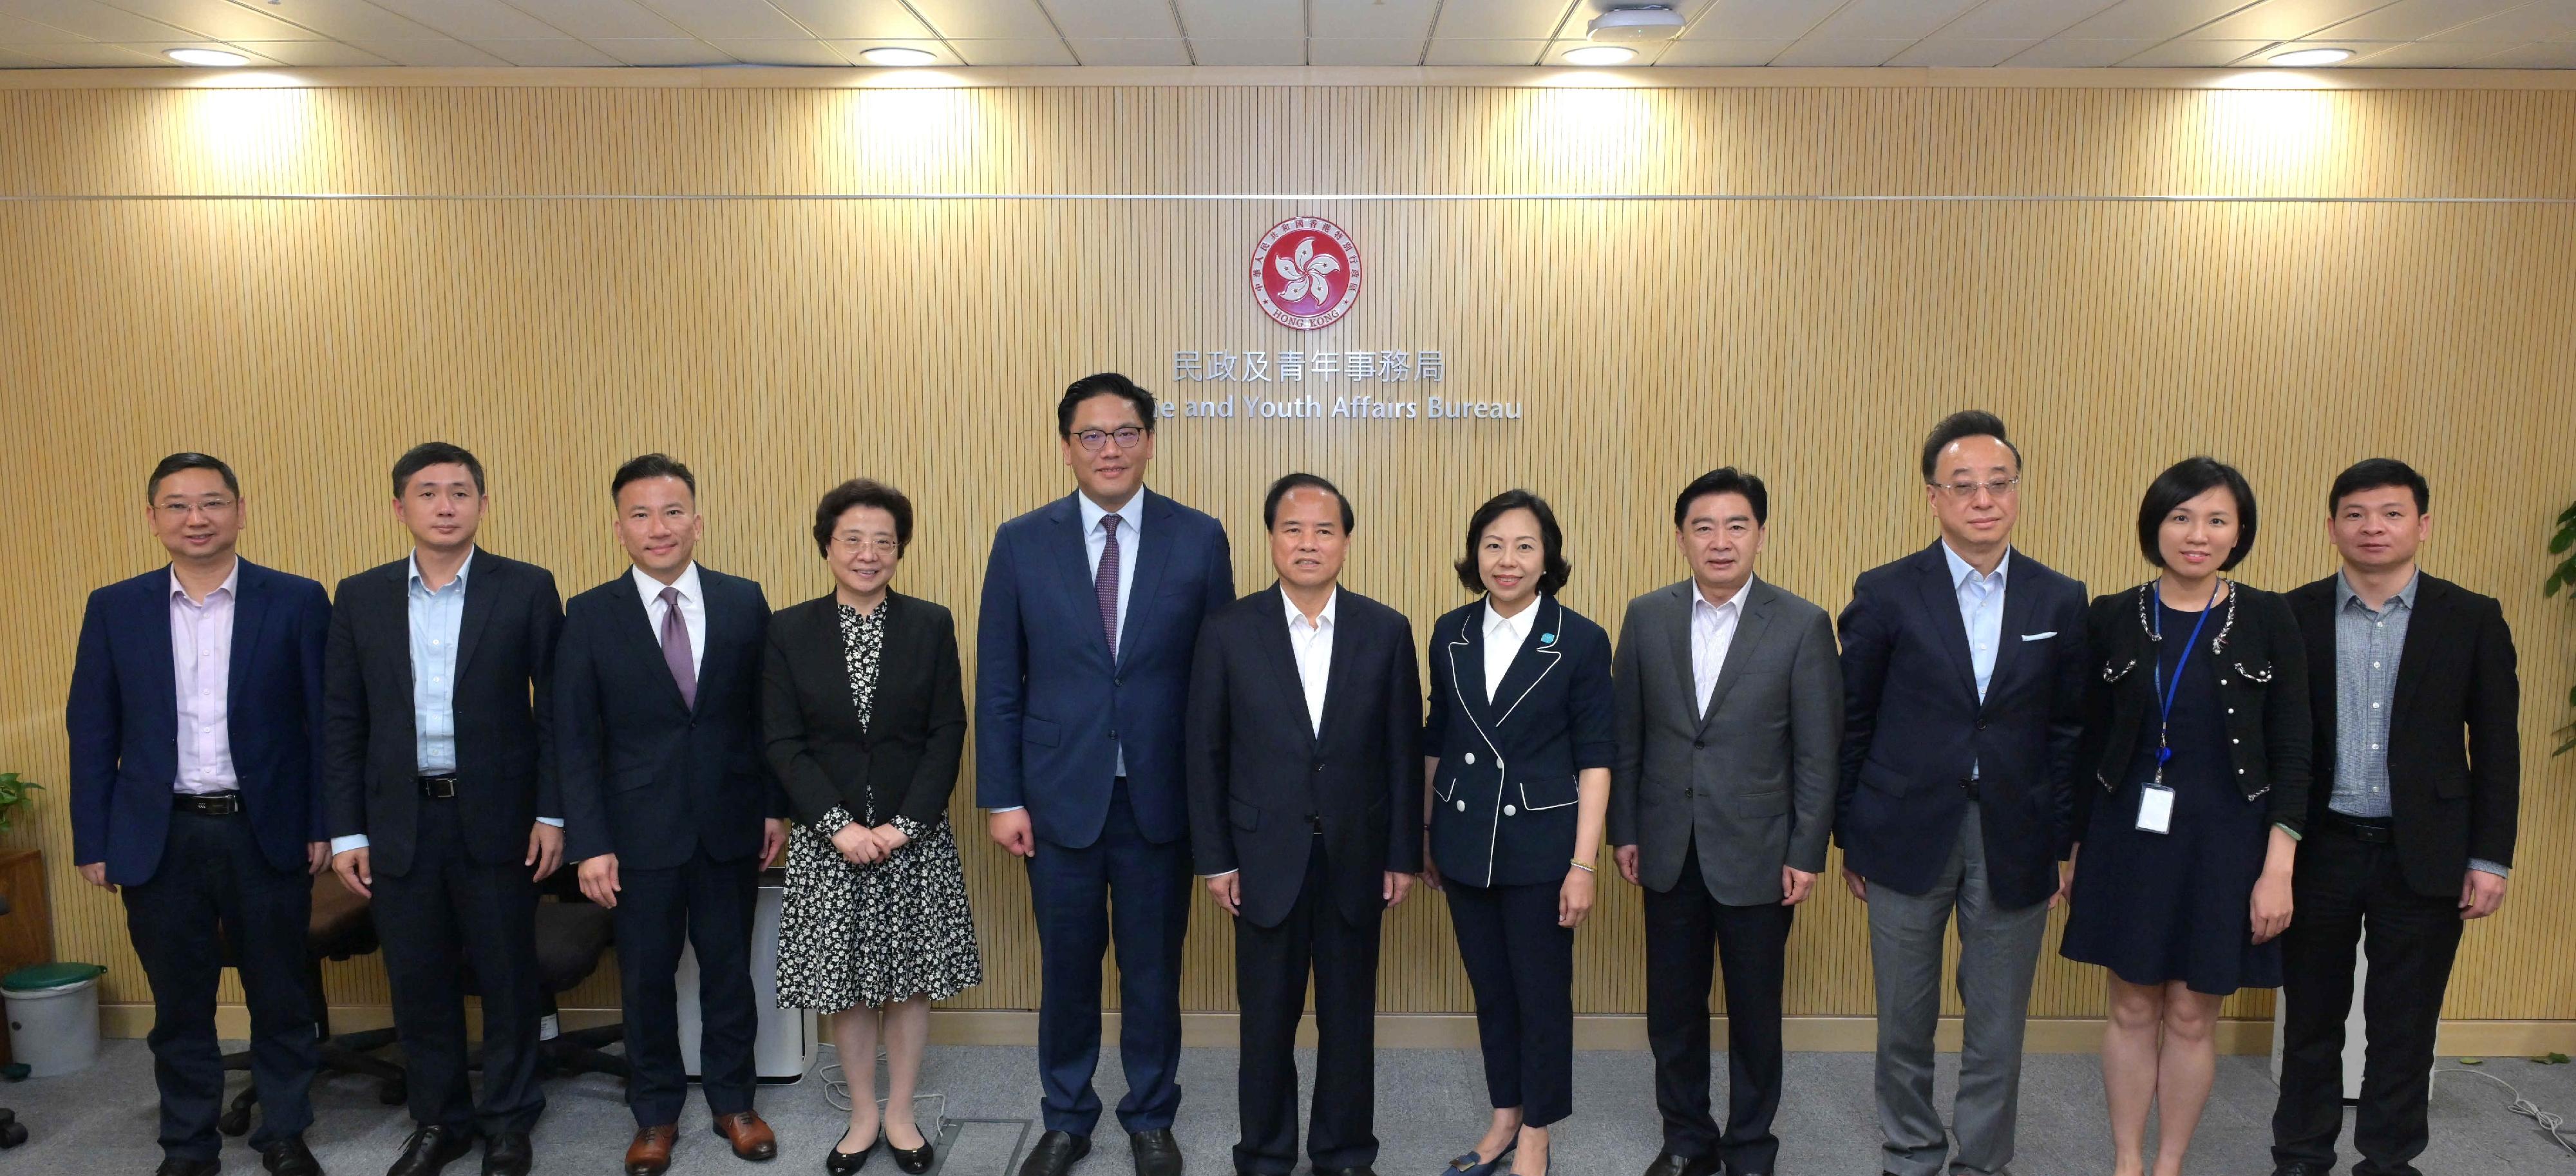 The Secretary for Home and Youth Affairs, Miss Alice Mak (fifth right), today (May 22) met with a delegation led by the Chairperson of the Committee on Liaison with Hong Kong, Macao, Taiwan and Overseas Chinese of the National Committee of the Chinese People's Political Consultative Conference, Mr Liu Cigui (centre), to exchange views on promoting Hong Kong's youth integration into the country's overall development and youth exchanges between the Mainland and Hong Kong. The Under Secretary for Home and Youth Affairs, Mr Clarence Leung (fifth left), and the Commissioner for Youth, Mr Wallace Lau (third left), also join the meeting.